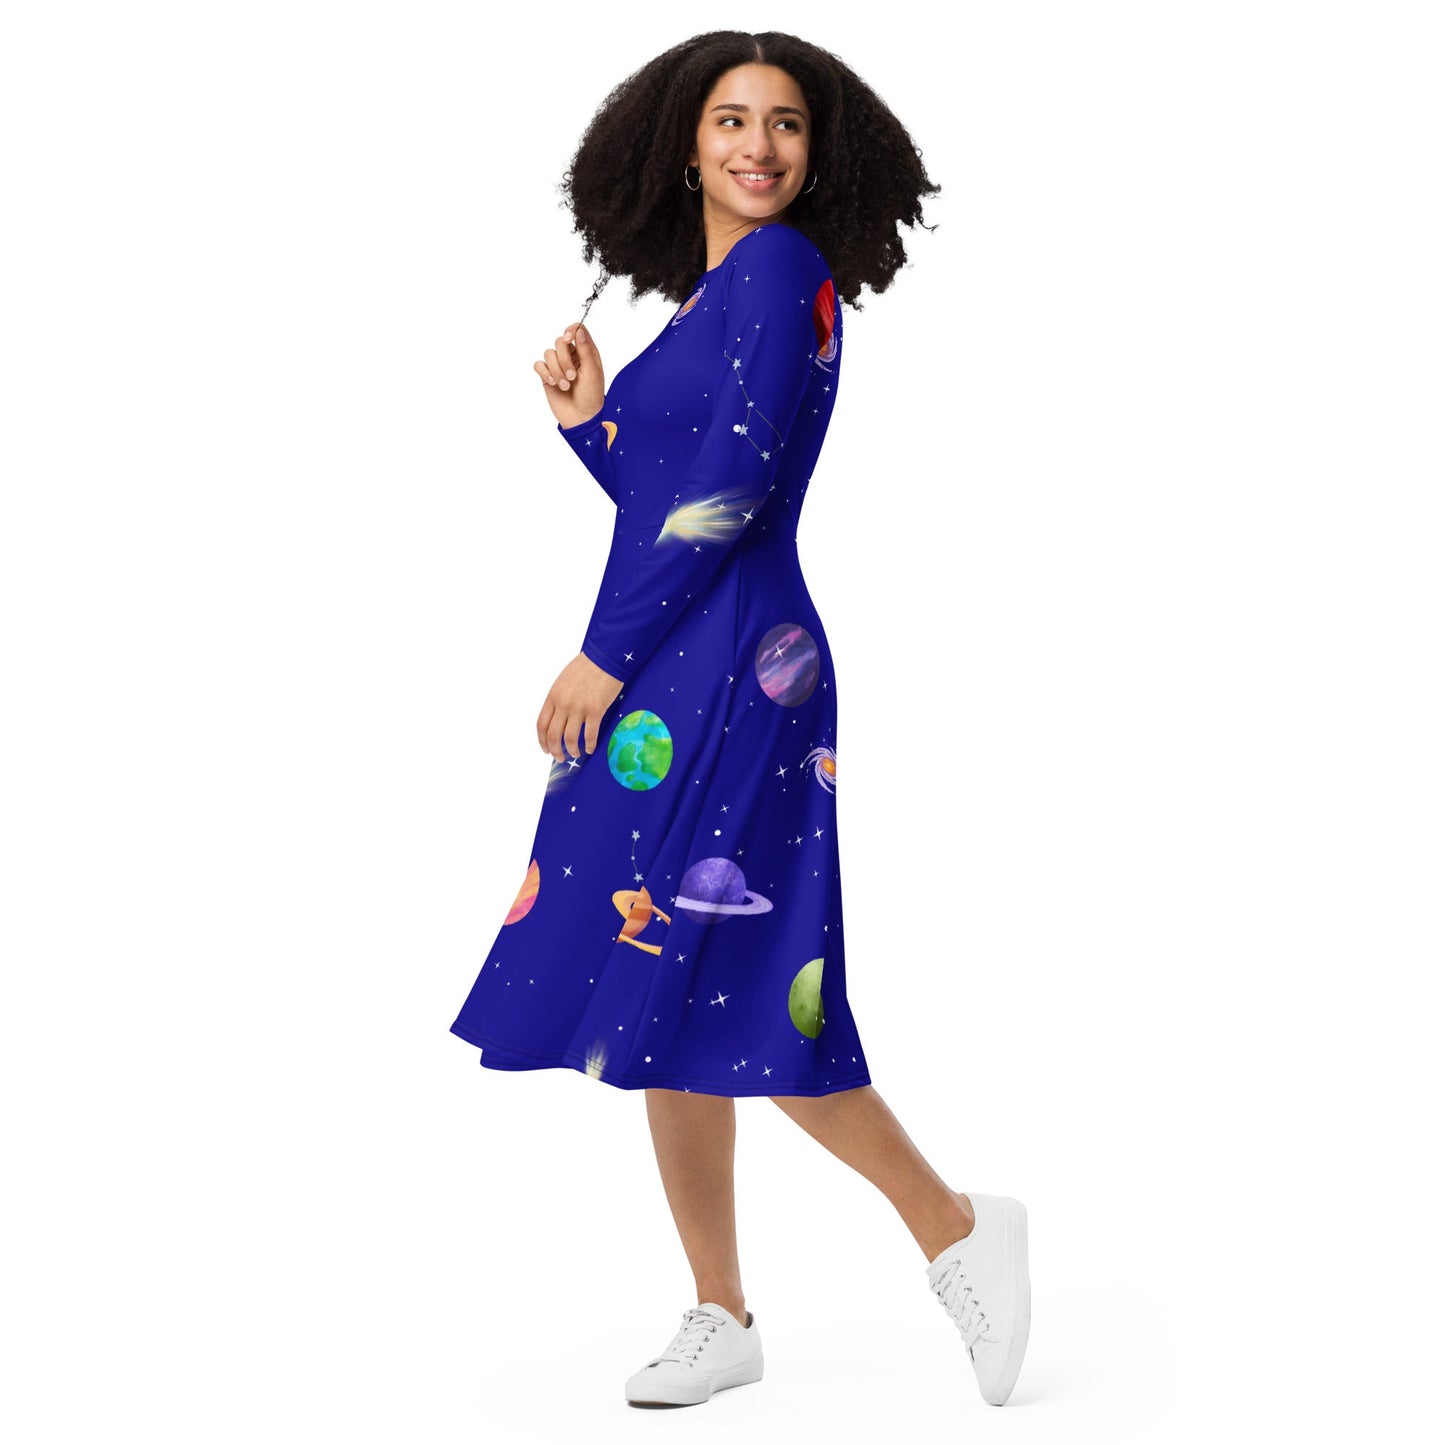 The Frizz long sleeve midi dress book costumebook dressWrong Lever Clothing